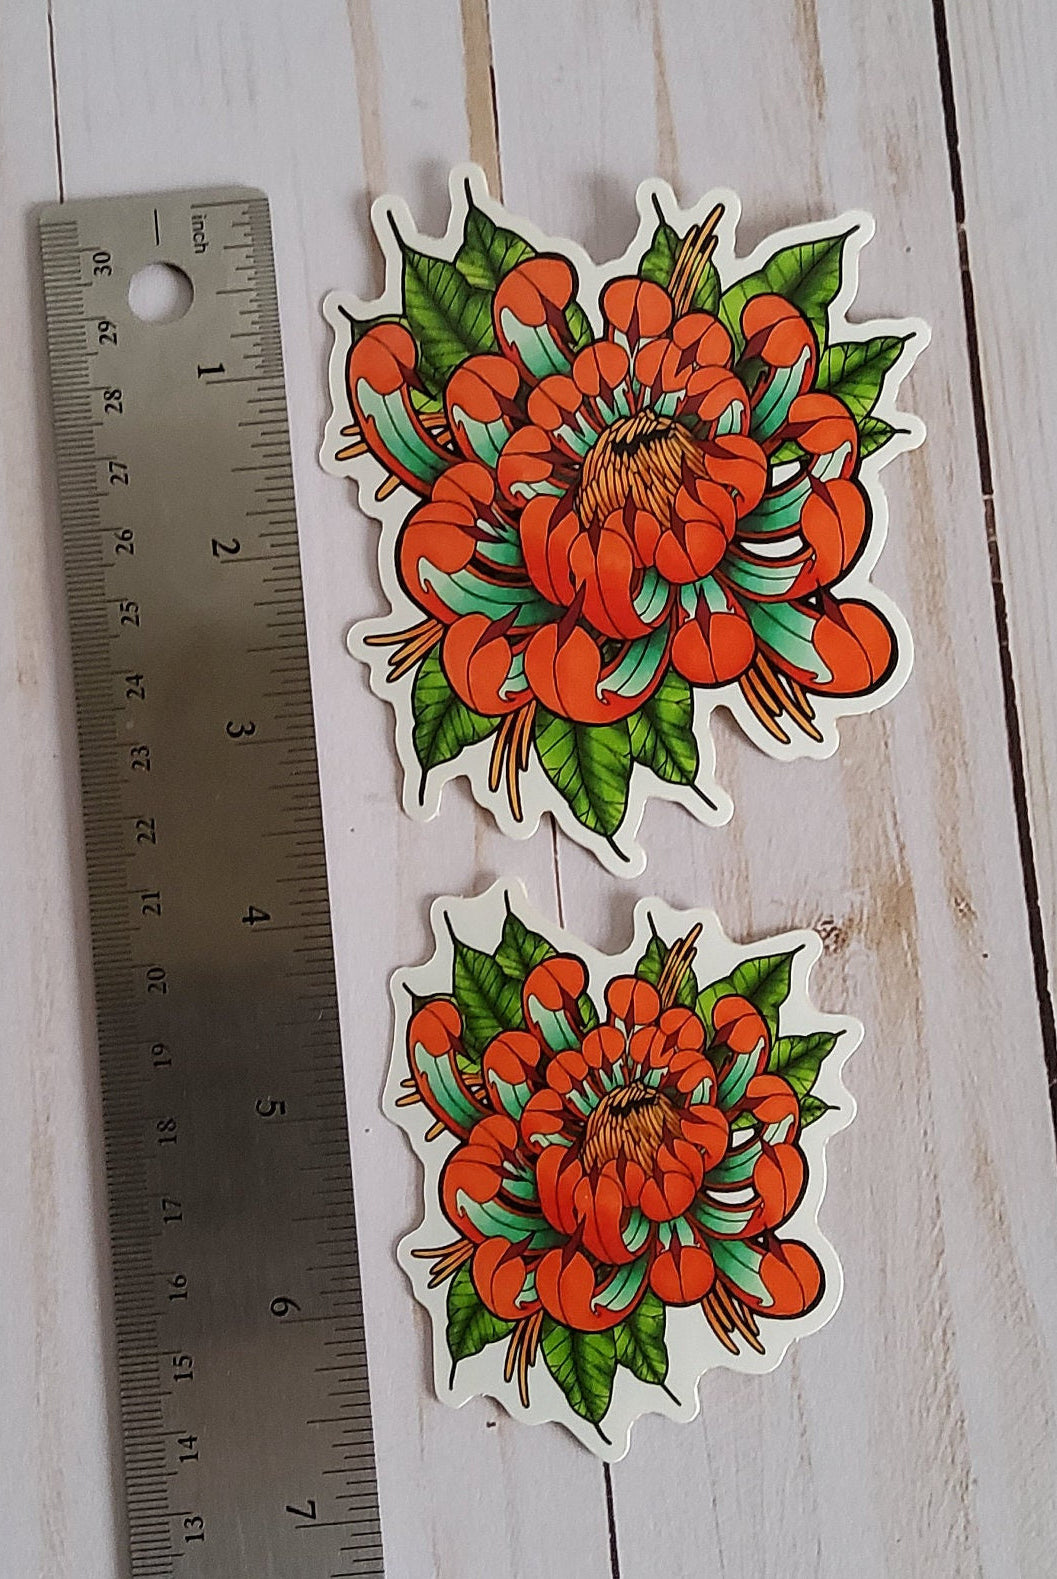 GLOSSY STICKER: Tattoo Style Teal and Orange Chrysanthemum , Chrysanthemum Sticker , Chrysanthemum Art , Floral Sticker , Floral Art Sticker